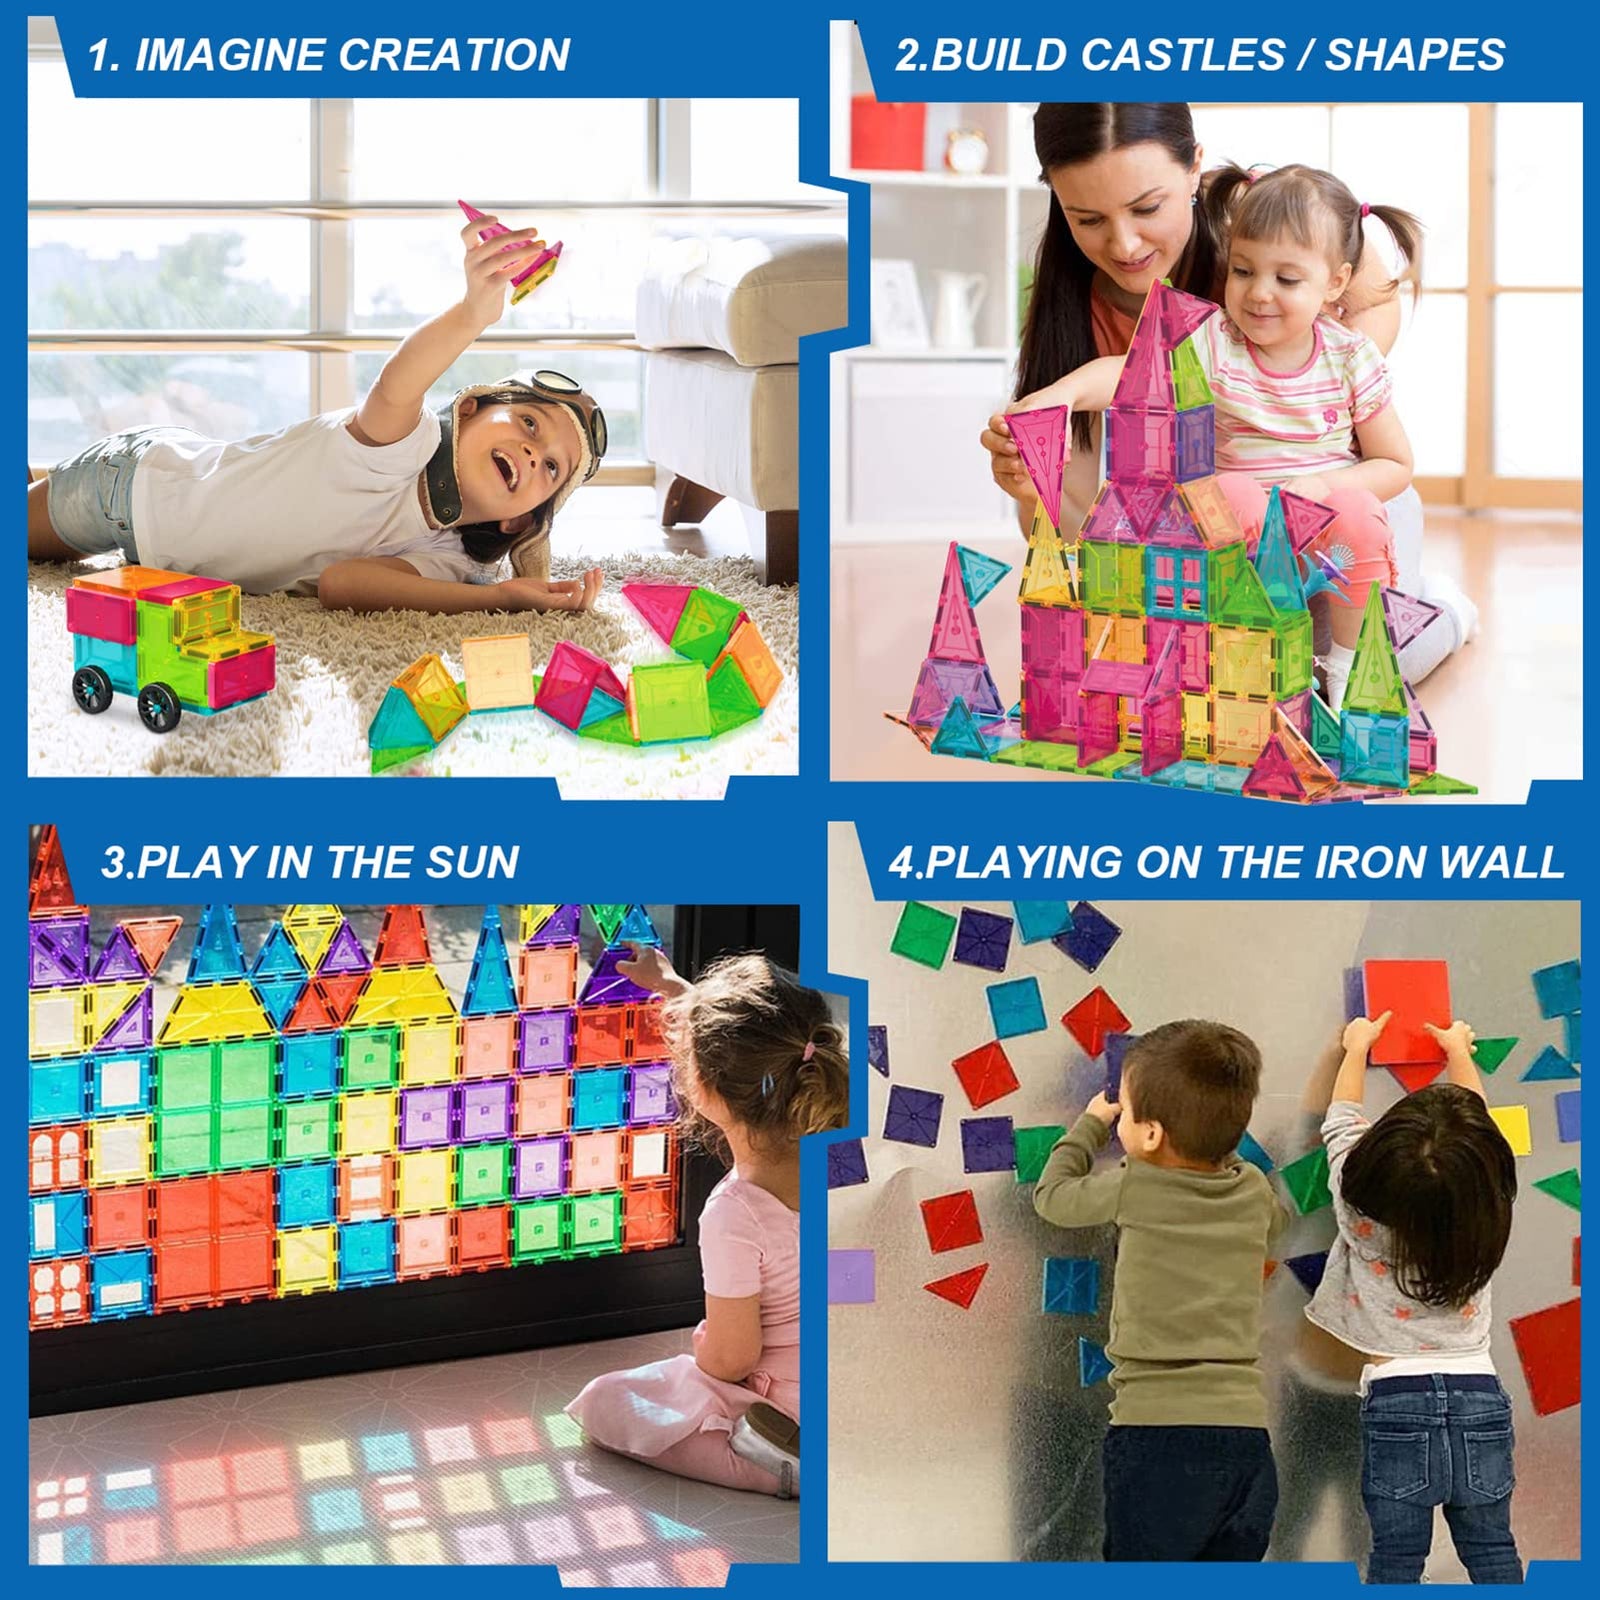 Landtaix Kids Magnet Tiles Toys New Upgrade 100Pcs Oversize 3D Magnetic Building Blocks Tiles Set,Inspirational Educational Toys for 3 4 5 6 Year Old Boys Gilrs Gifts